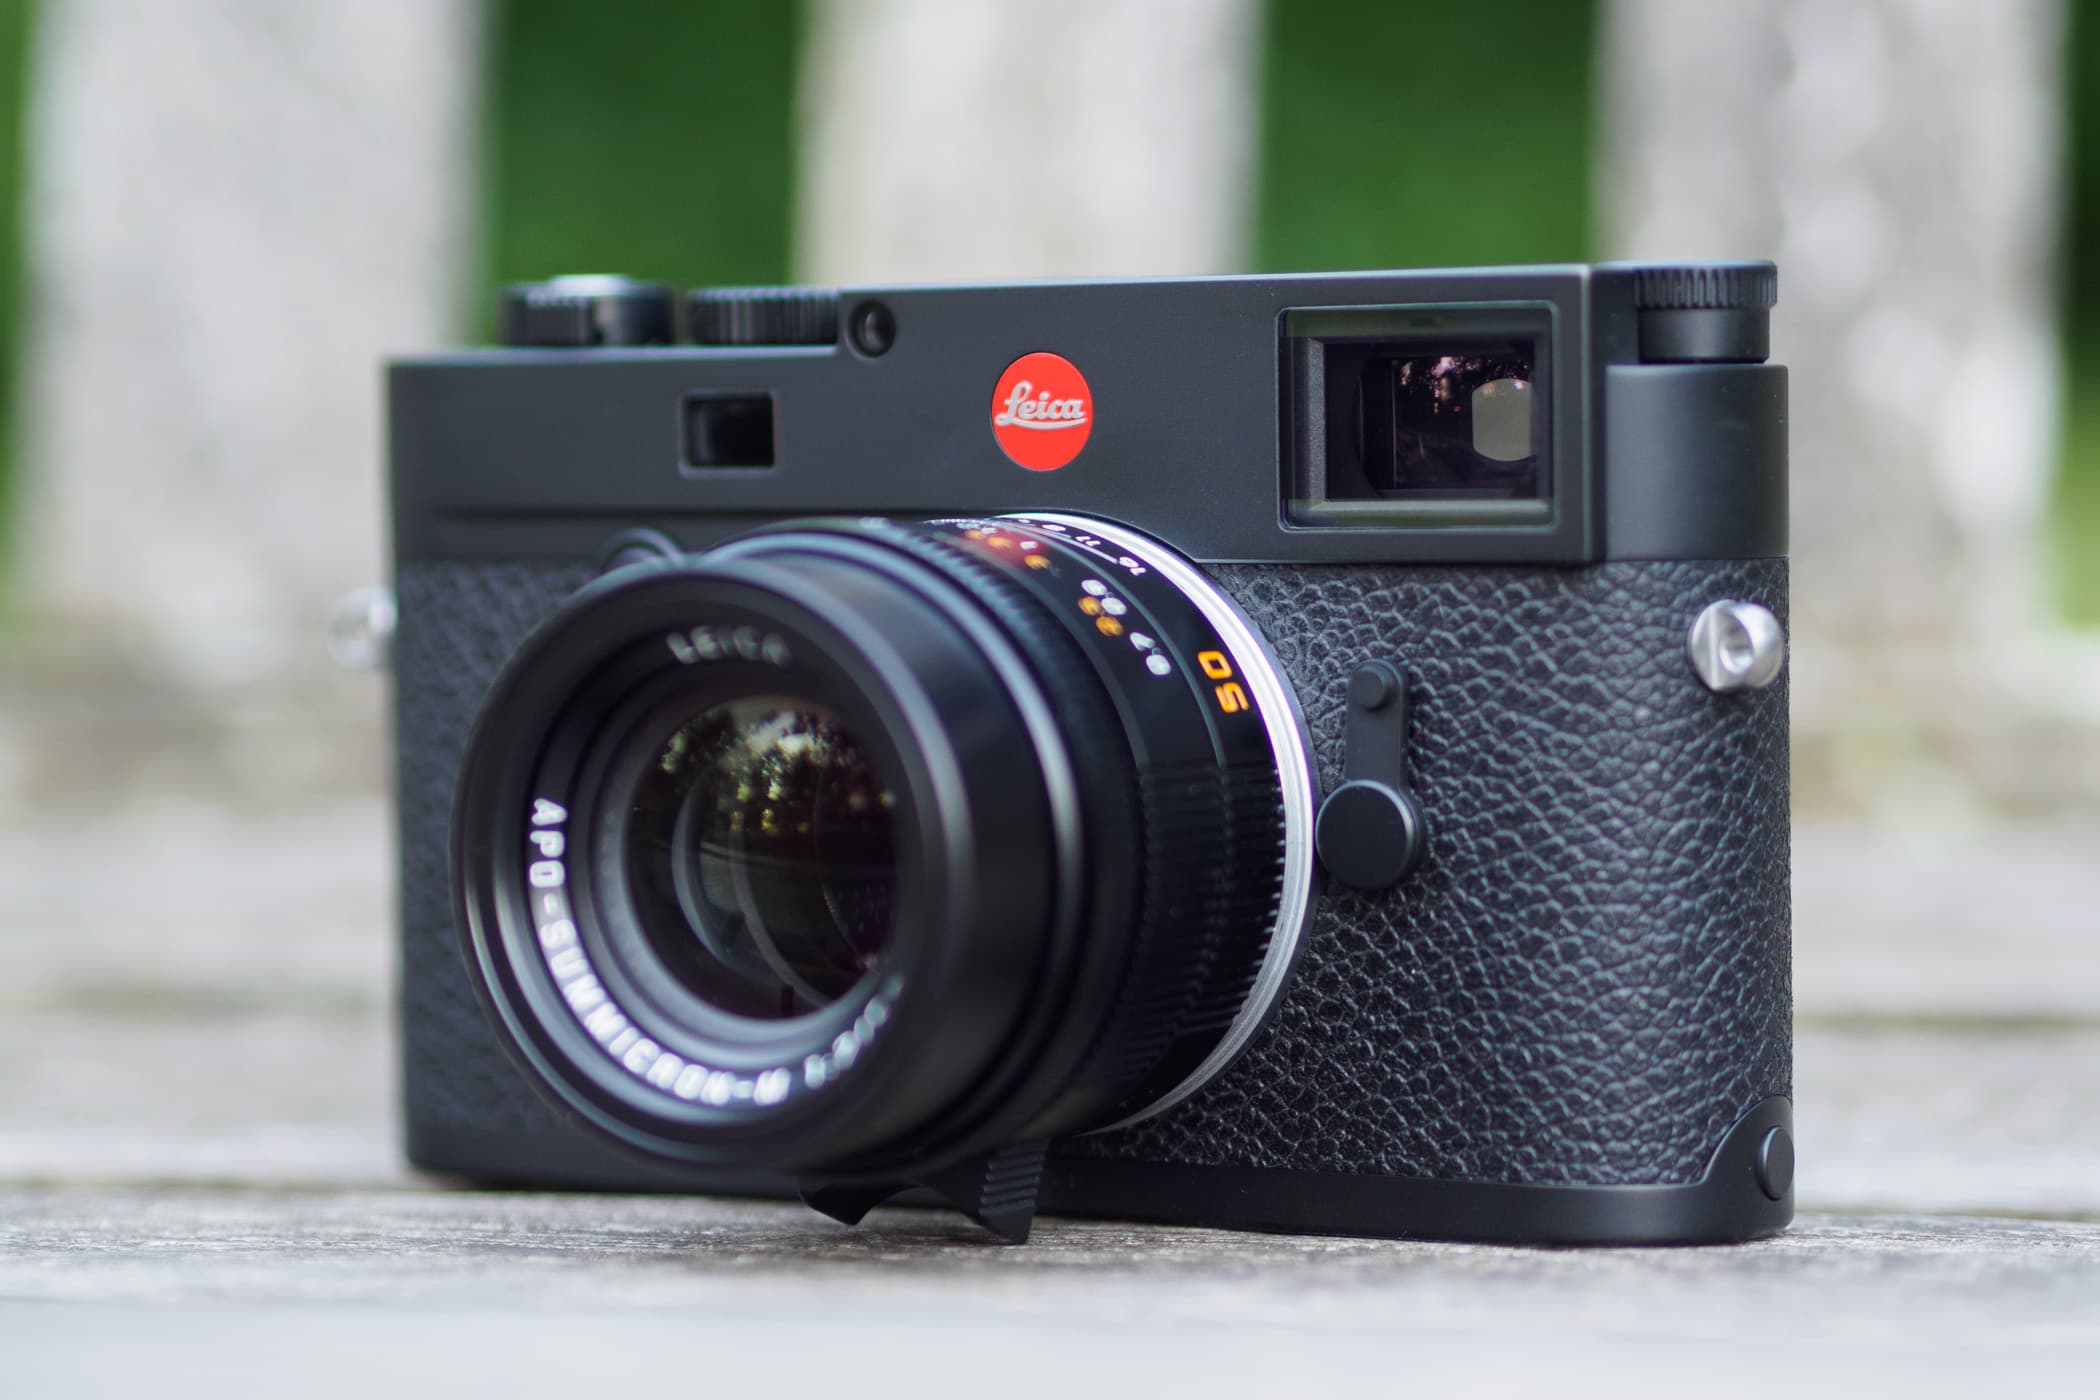 Leica M10 interview: why no video, where is the Typ label